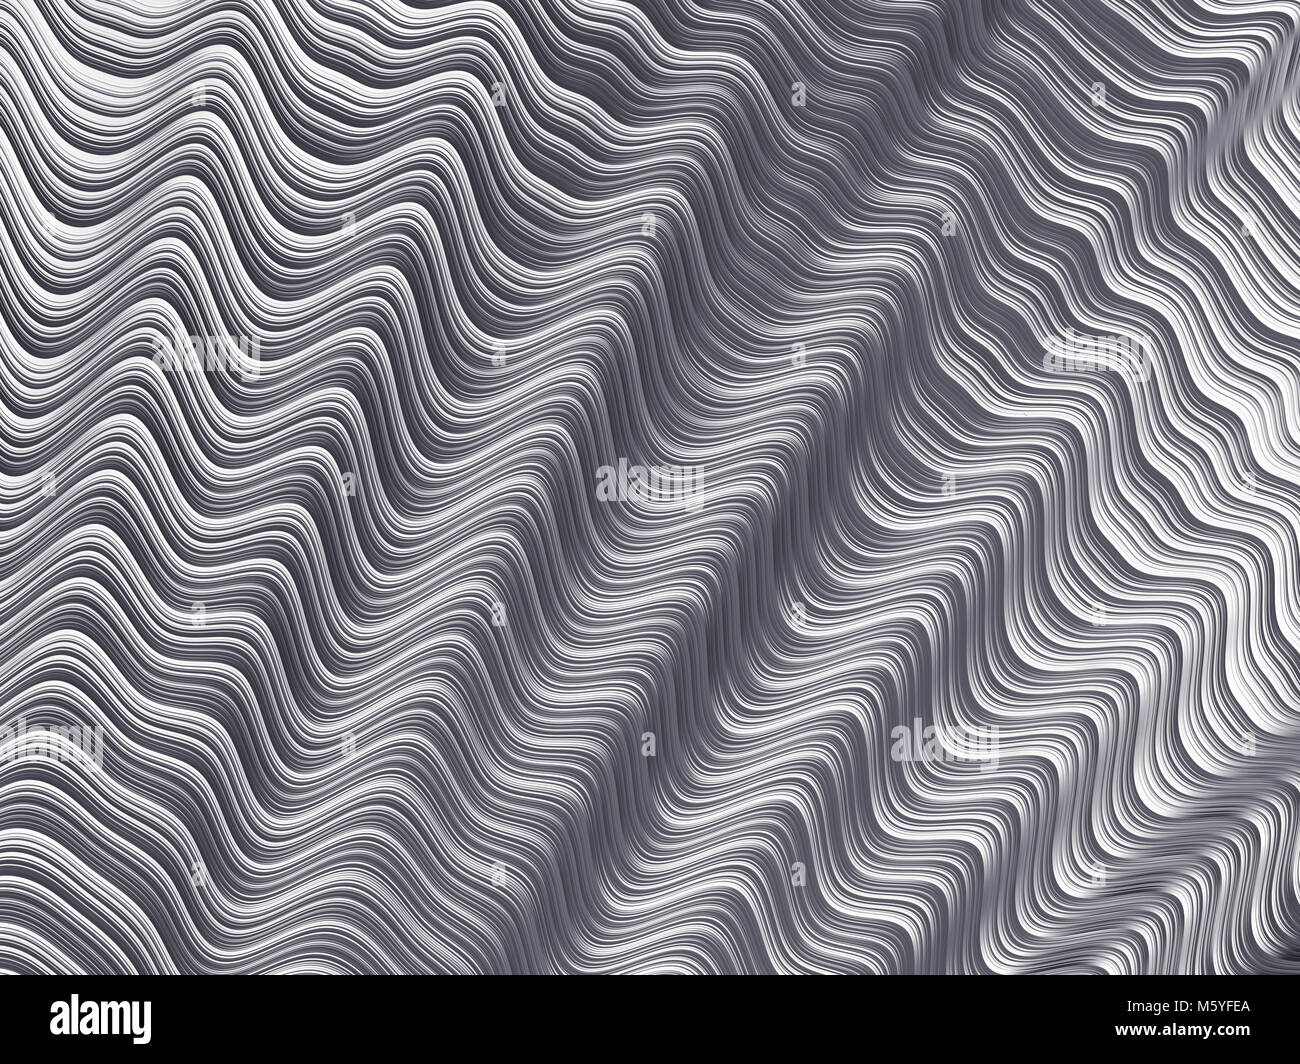 high resolution fractal background with grey wavy smooth patterns Stock Photo